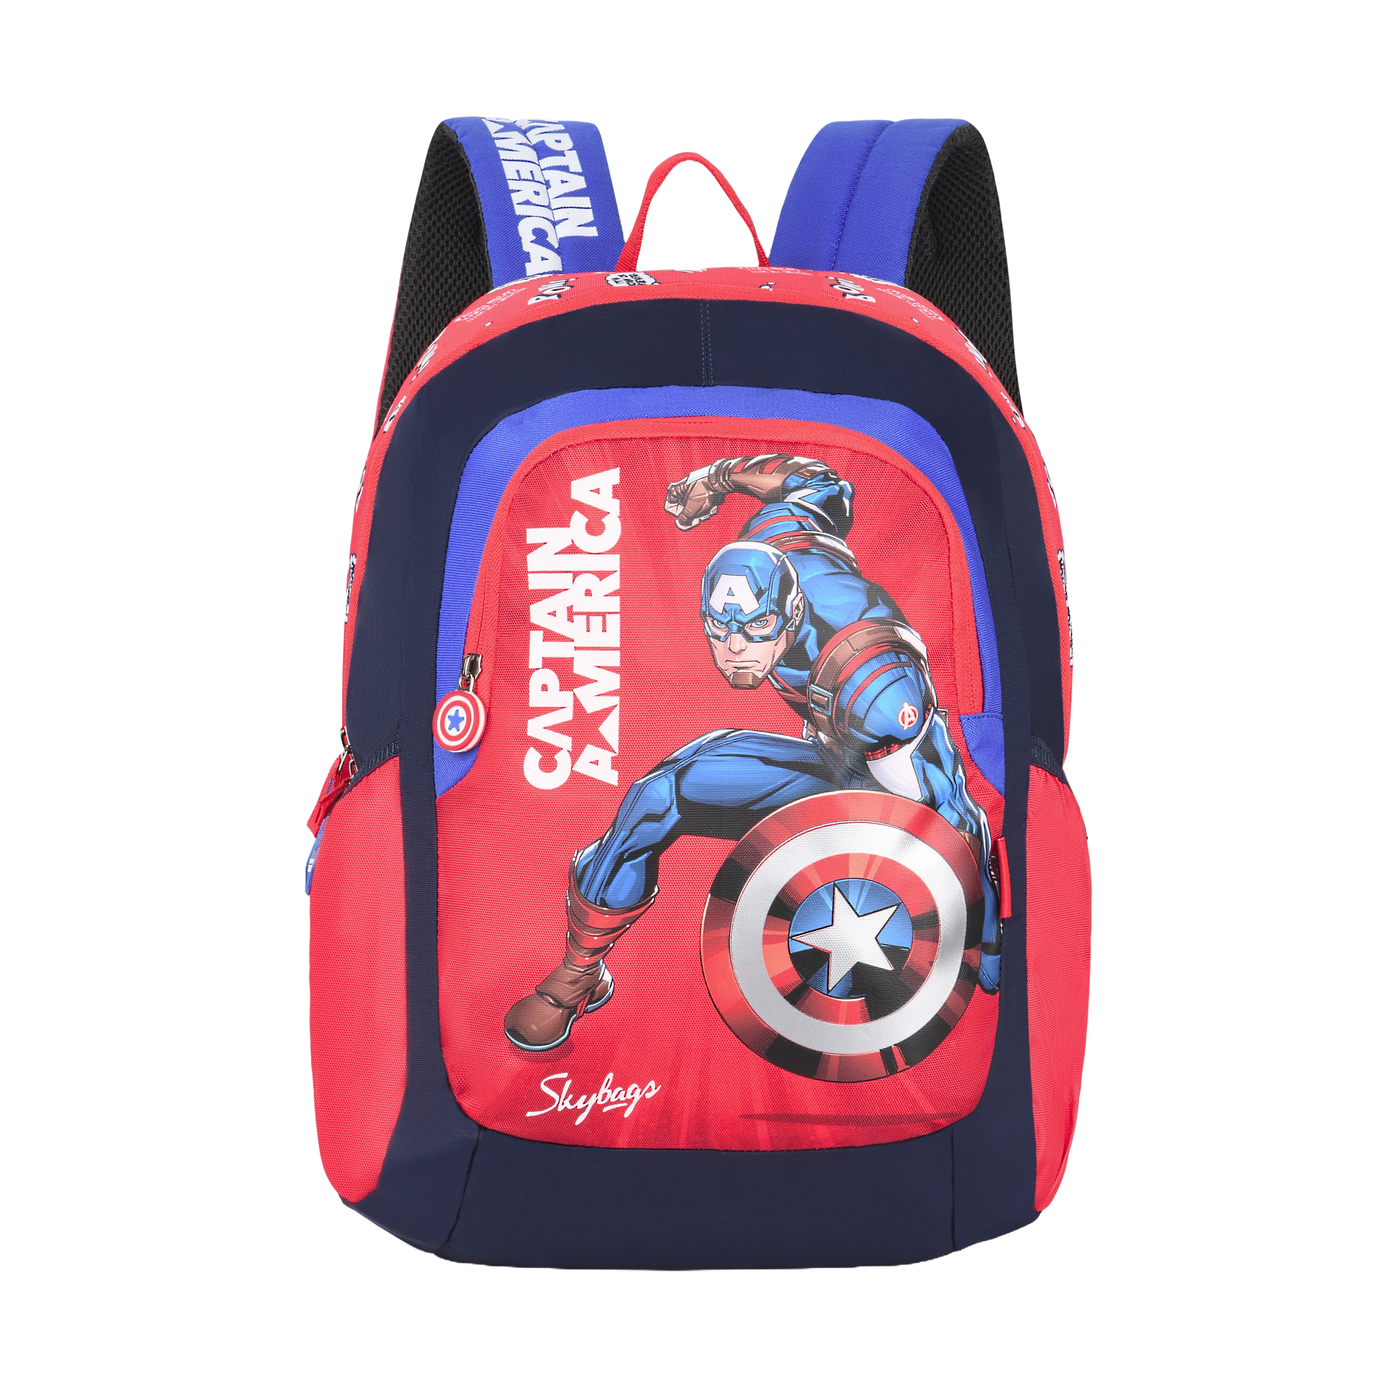 Buy Skybags School Backpack 30L With Rain Cover, 3 Spacious Compartments,  Quick Access Front Pocket, ID Tag & Captain America Marvel Print | Navy |  Disney at Amazon.in